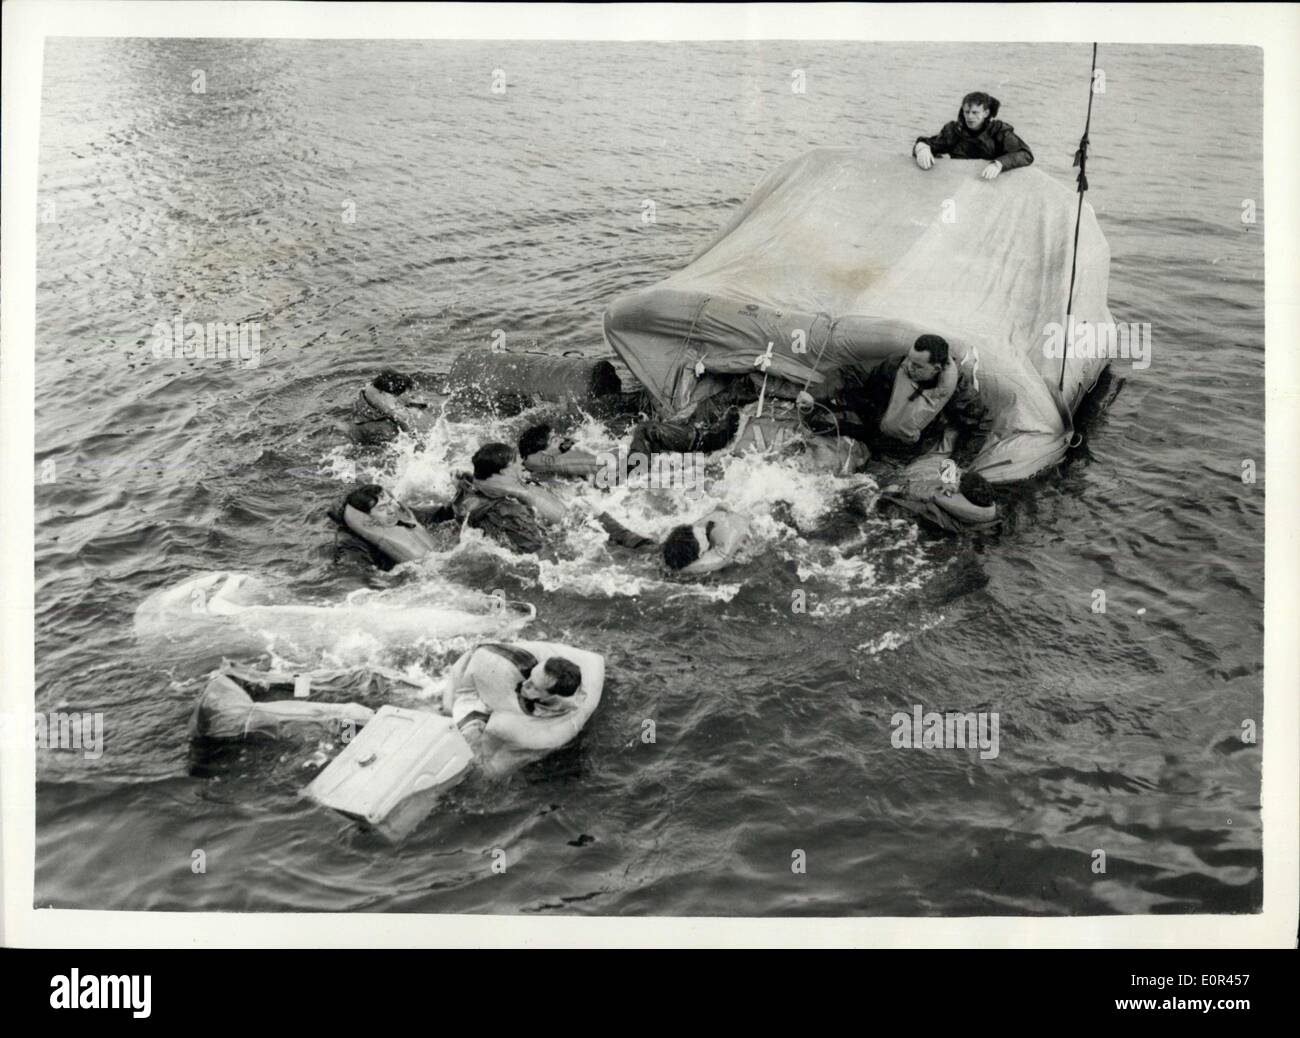 Jan. 20, 1958 - Testing Of Hydrostatic Release Units For Improved Inflatable Life Rafts.: The testing of hydrostatic release units for improved inflatable life rafts, took place today at Portsmouth Dockyard. Photo shows Abandon Ship! - Naval airmen wearing standard exposure suits - abandon life-raft as it goes down from one and, after one of the naval airmen had accidentally punctured the raft with a knife, during the testing today. Stock Photo